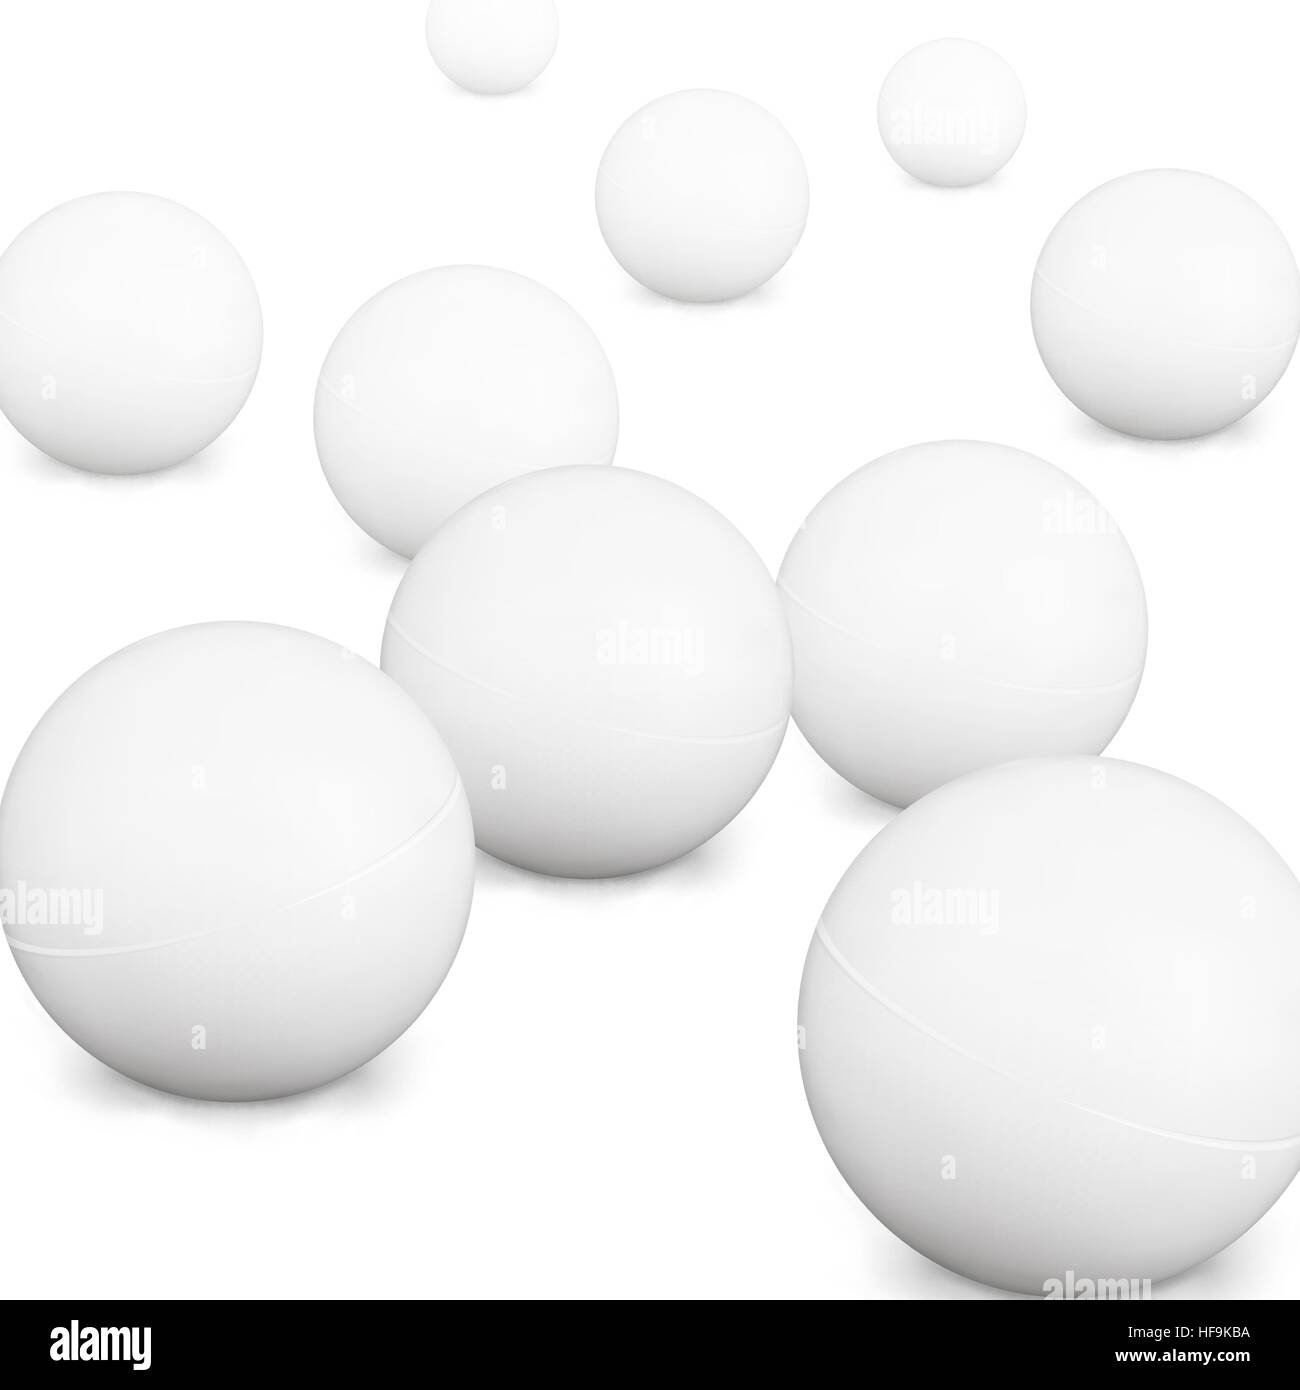 Ping Pong Balls. White Photo Realistic 3d Balls With Shadow. Isolated On White Background. Activity Game. Stock Vector